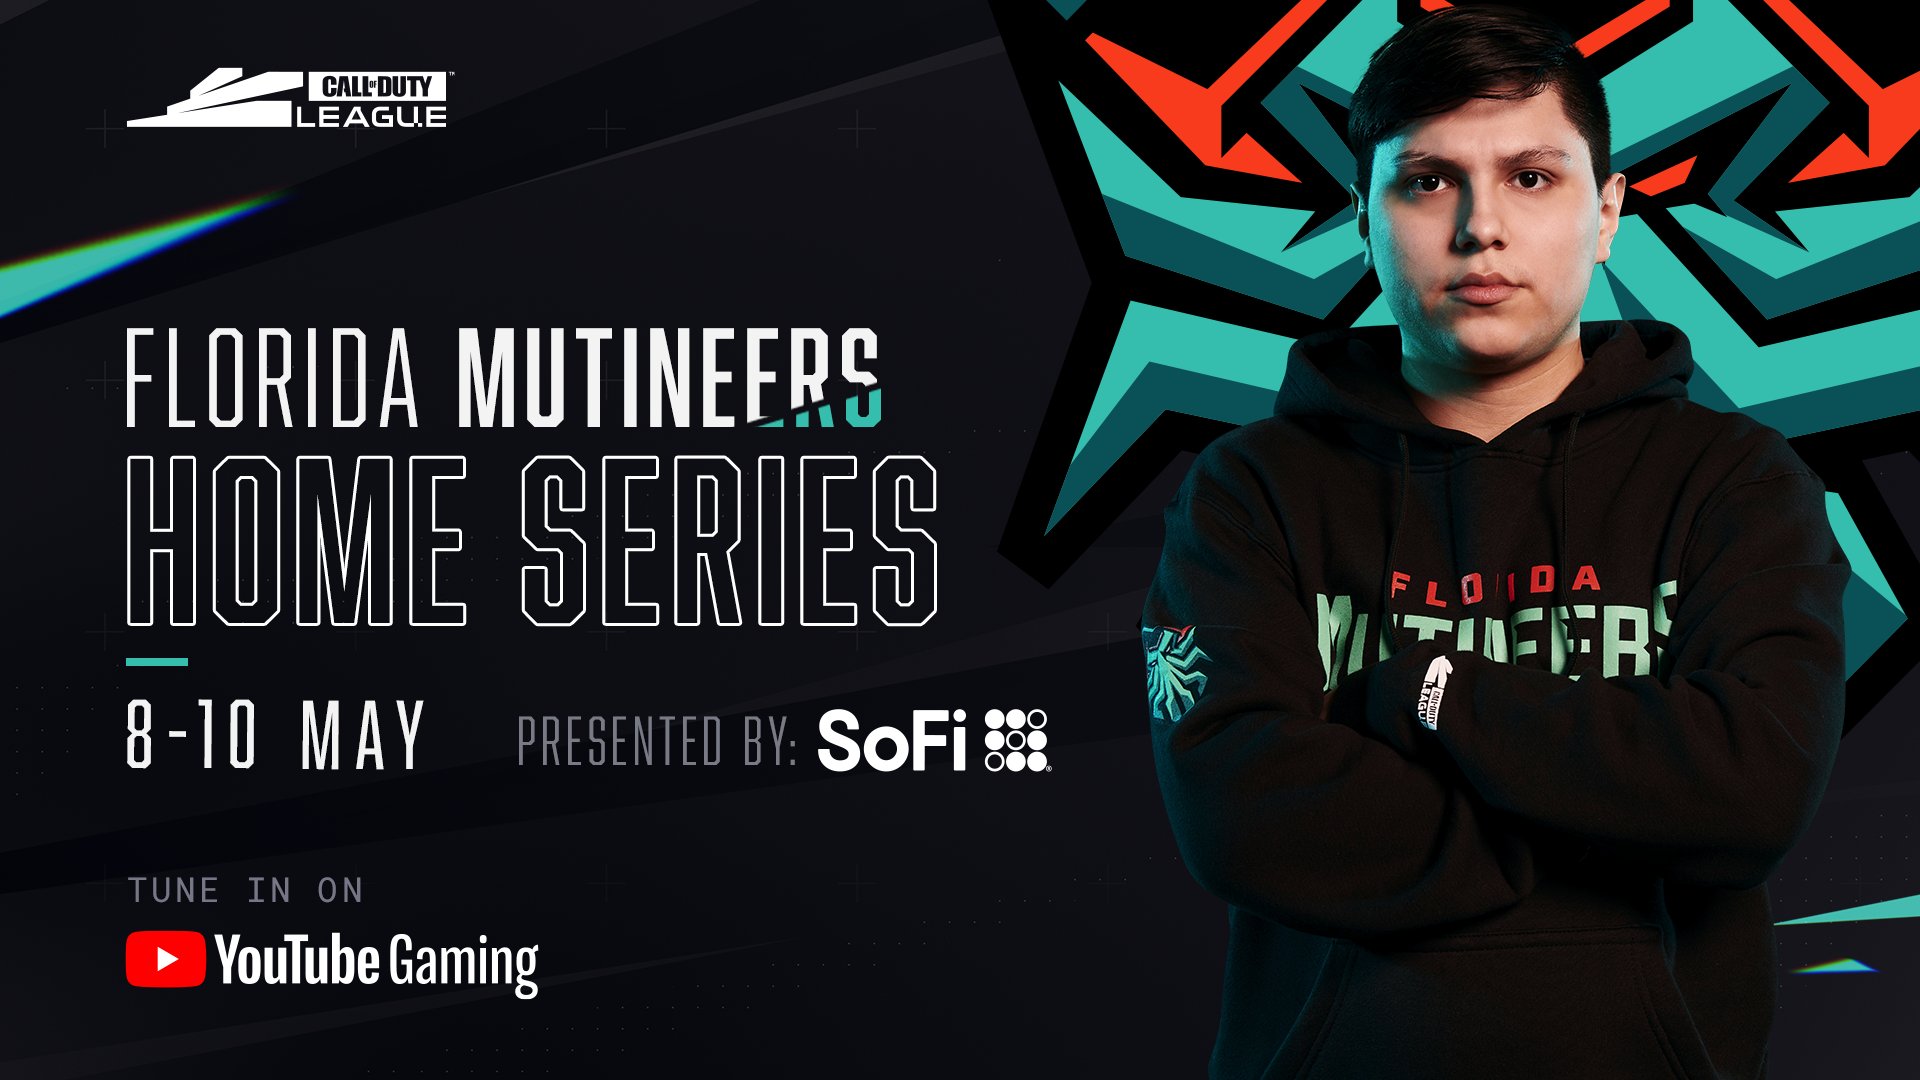 How to watch Florida Mutineers Home Series: stream, schedule & more